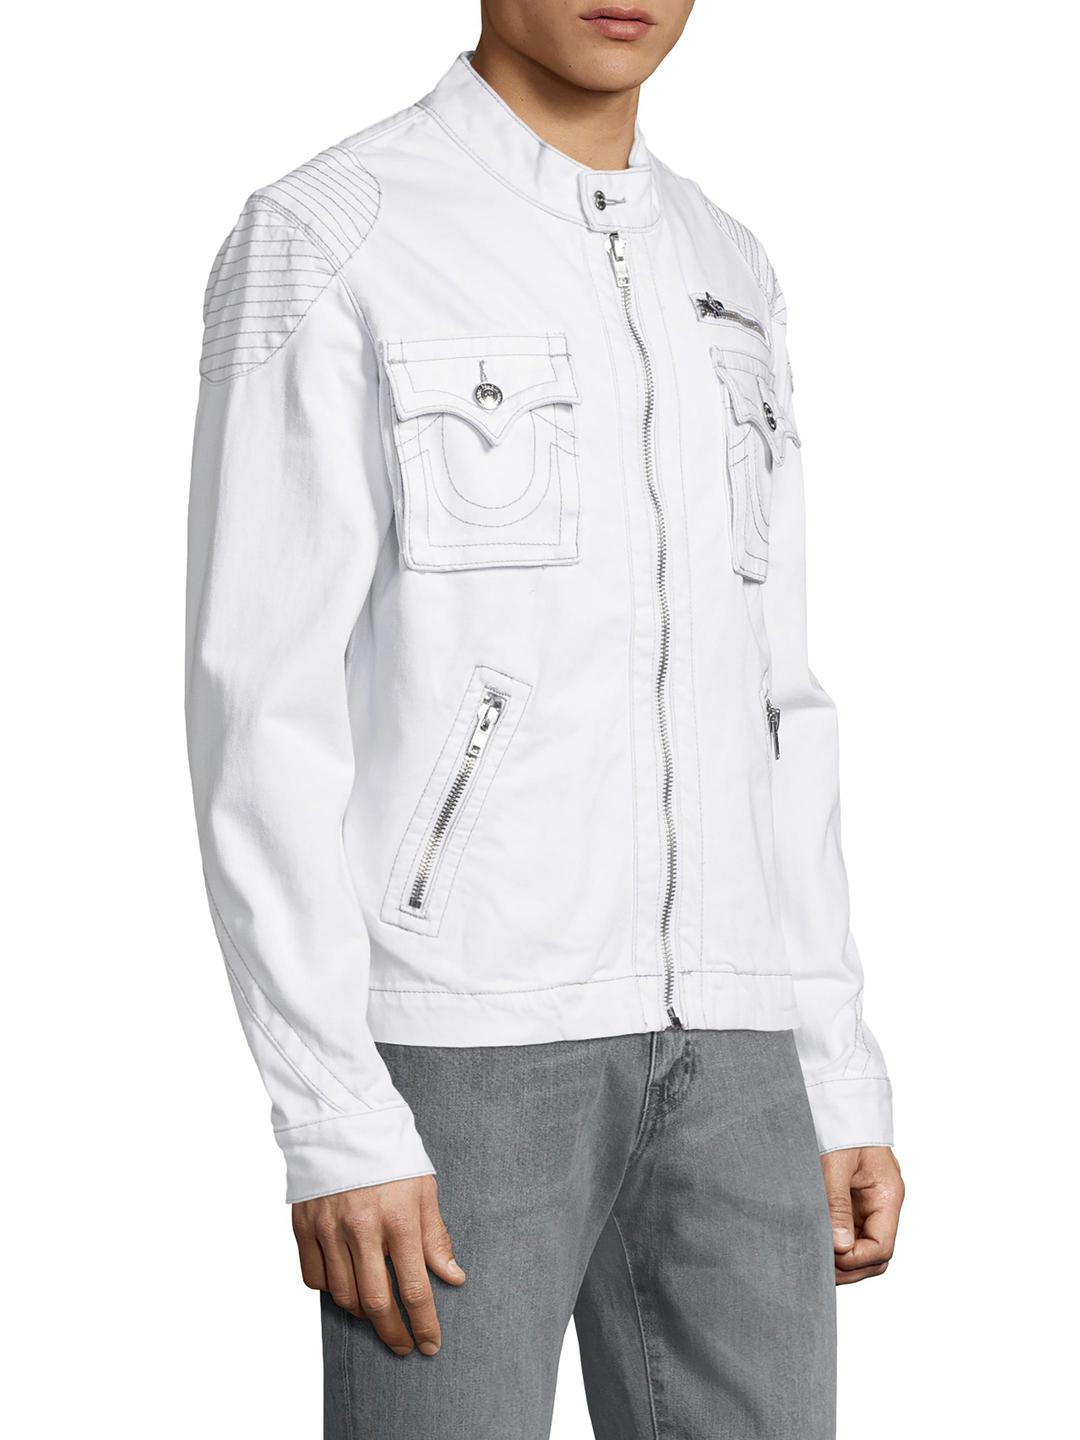 True Religion Motorcycle Cotton Jacket in White for Men - Lyst